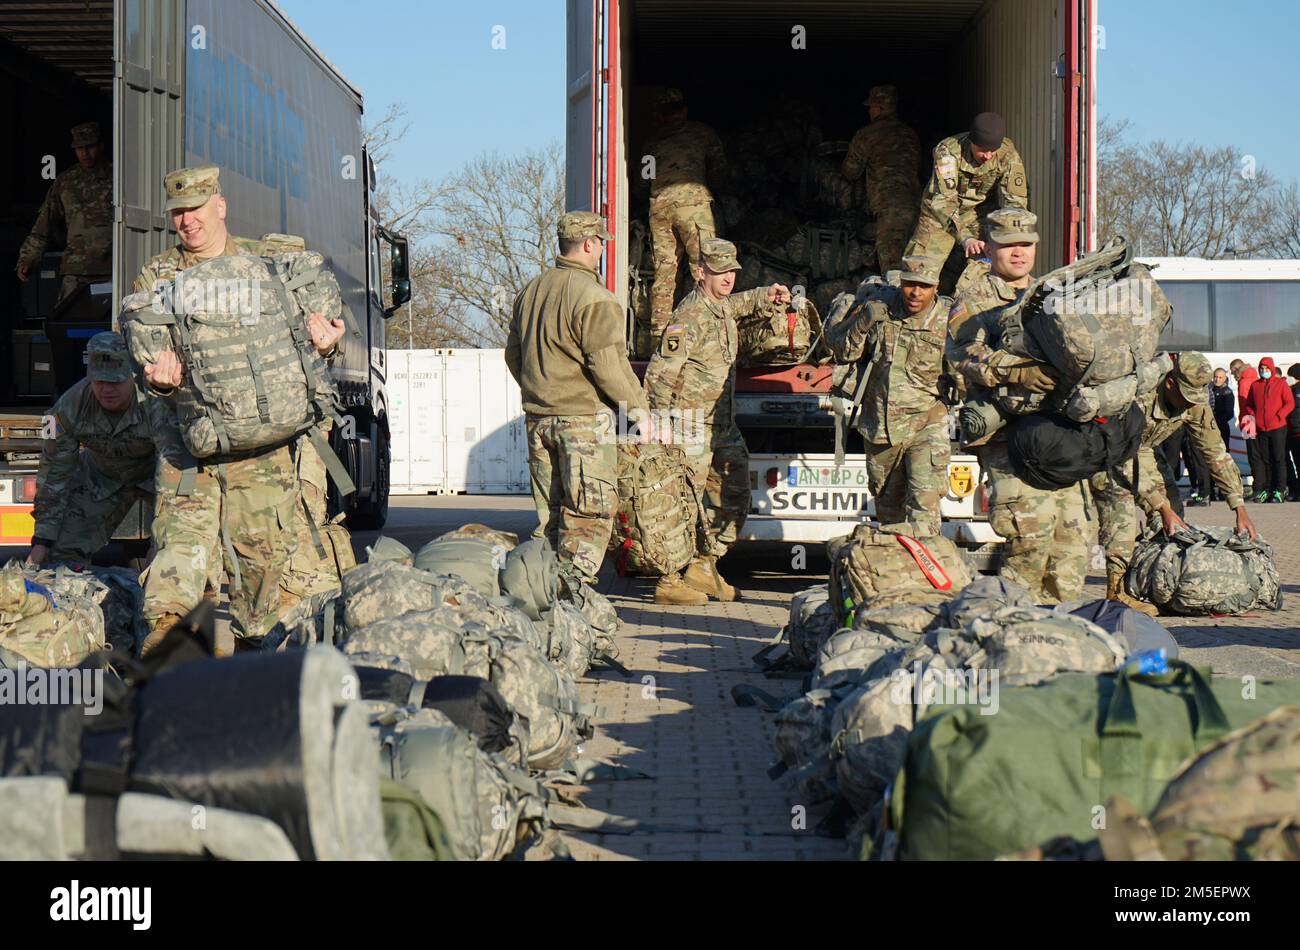 Soldiers from V Corps, Fort Knox, Ky., disembark from buses on Barton Barracks, Ansbach, Germany, March 8, 2022, as part of a deployment to Germany to build readiness, improve interoperability, reinforce allies and deter further Russian aggression. The deployment of U.S. forces here is a prudent measure that underpins NATO’s collective war-prevention aims, defensive orientation and commitment to protect all Allies. Stock Photo